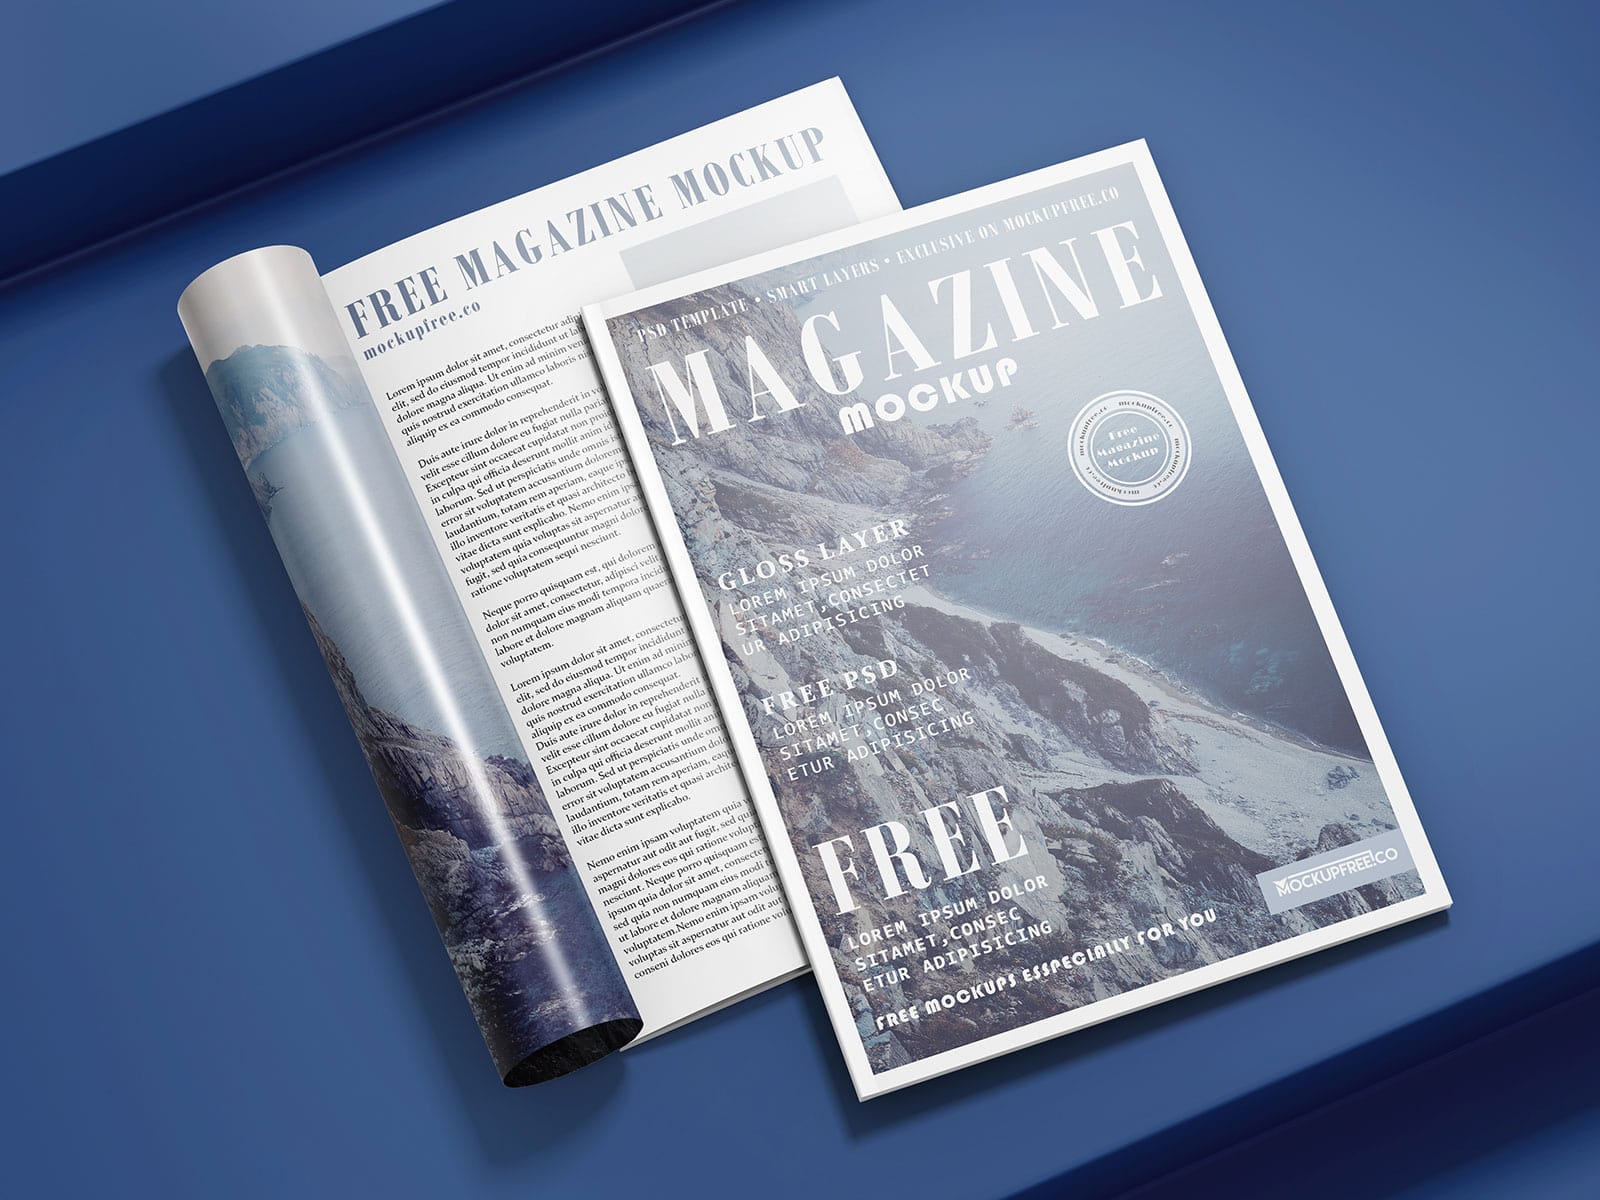 Download Realistic 3 Free Magazine Mockups Psd Sets Psfiles